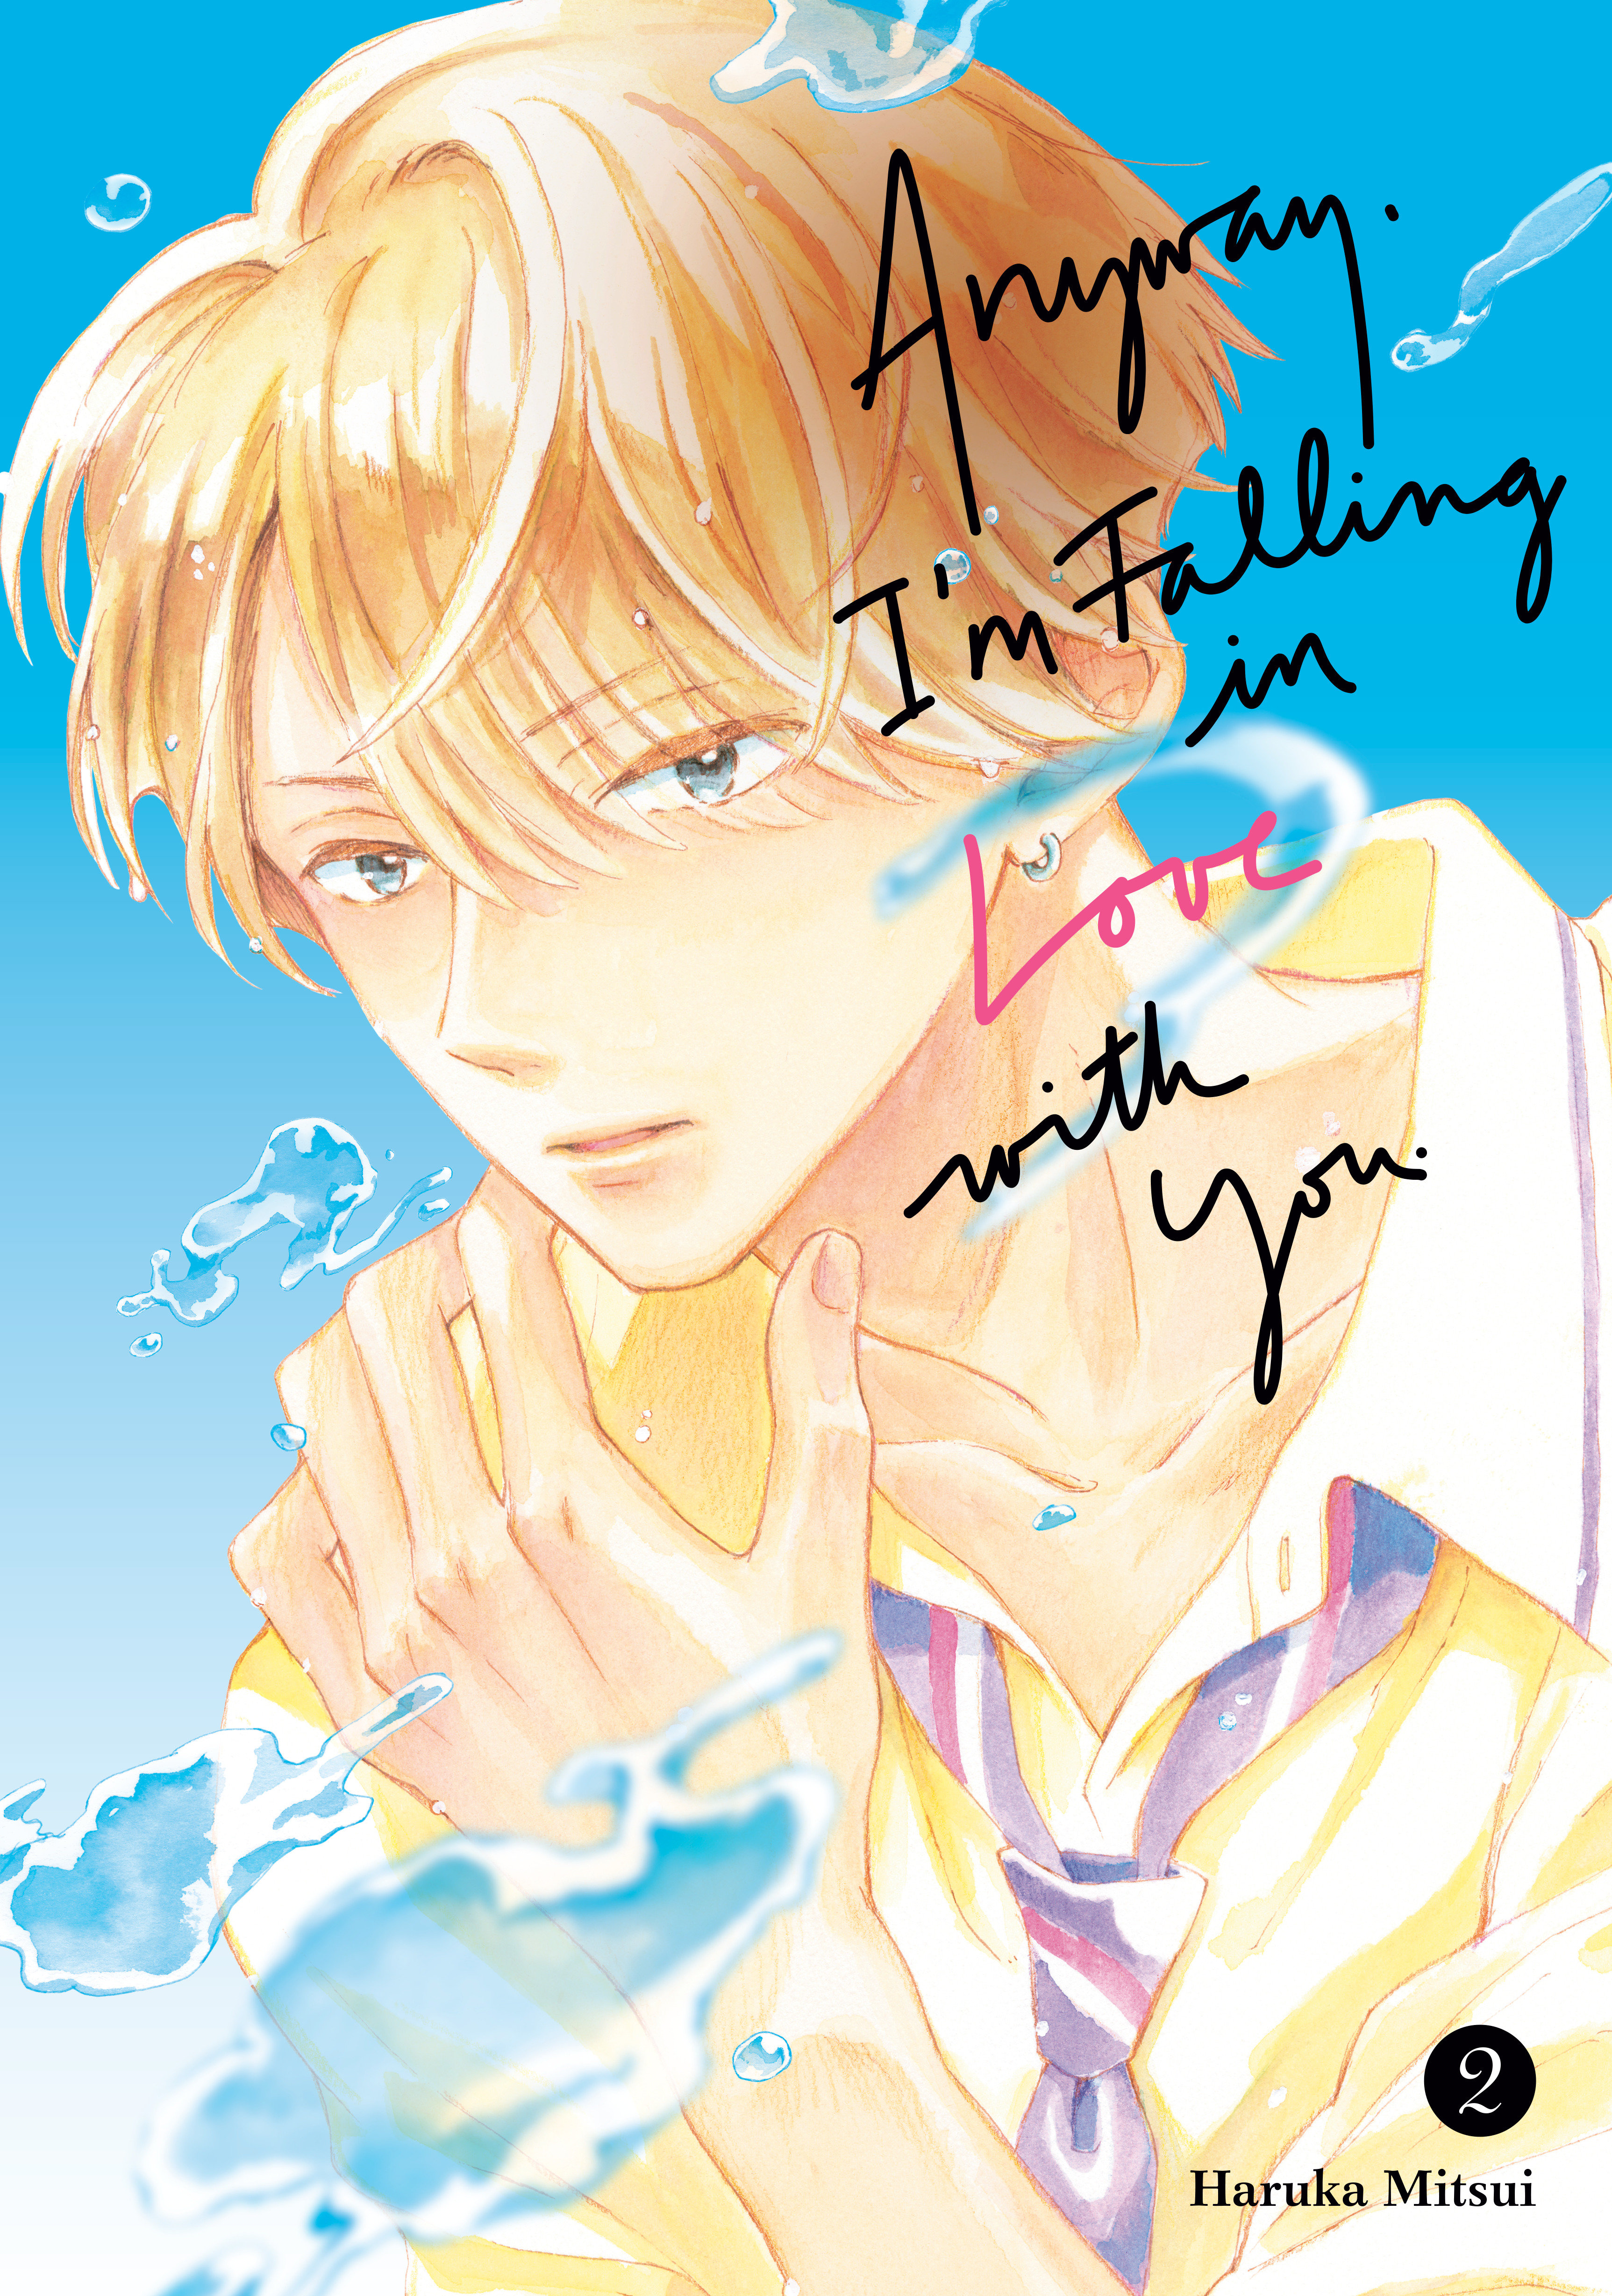 Anyway, I'm Falling in Love with You Manga Volume 2